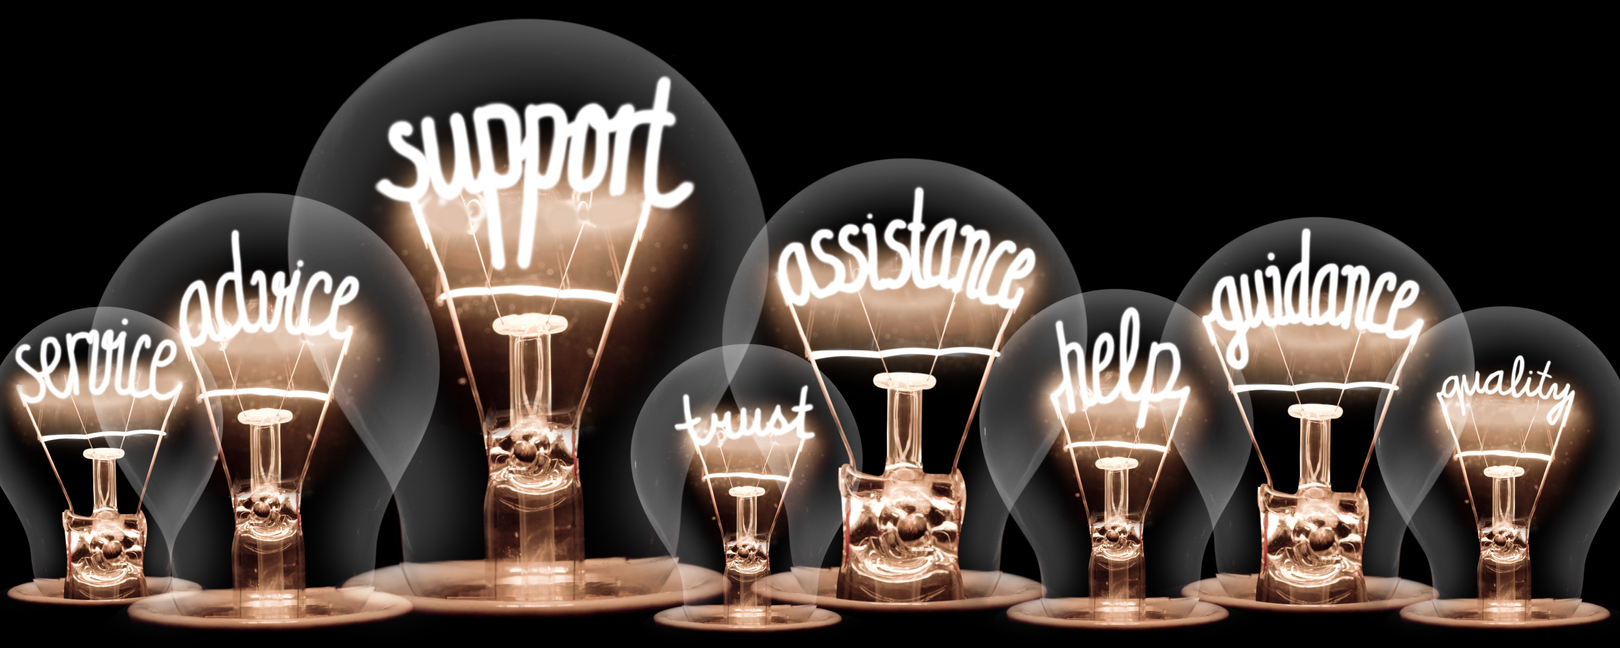 Group of lightbulbs with shining fibres in the shape of words including 'service', 'advice', 'support', 'assistance', 'help' and 'guidance'